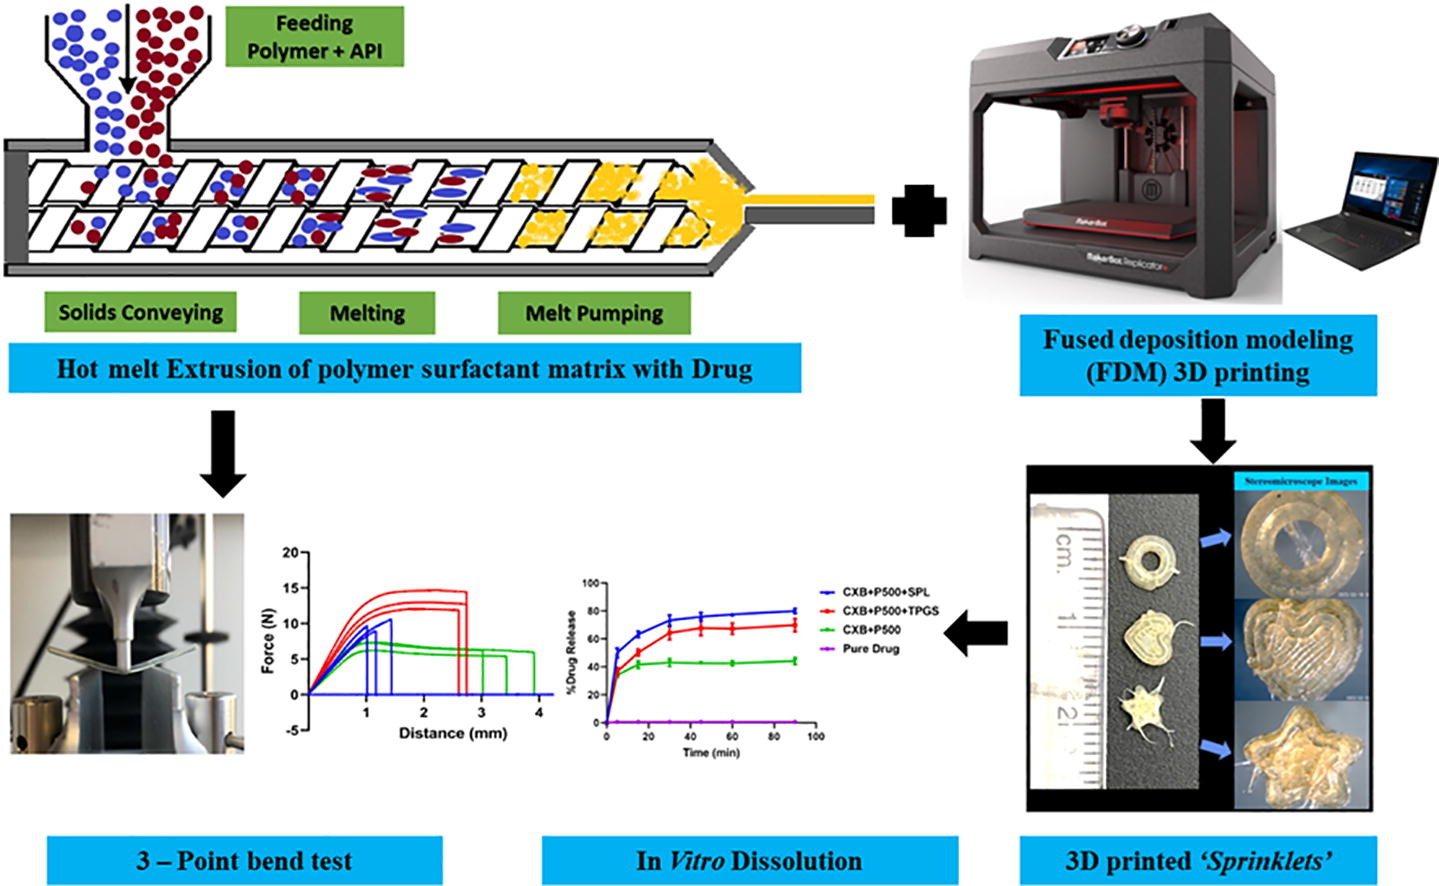 Application of 3D printing technology for the development of dose adjustable geriatric and pediatric formulation of celecoxib